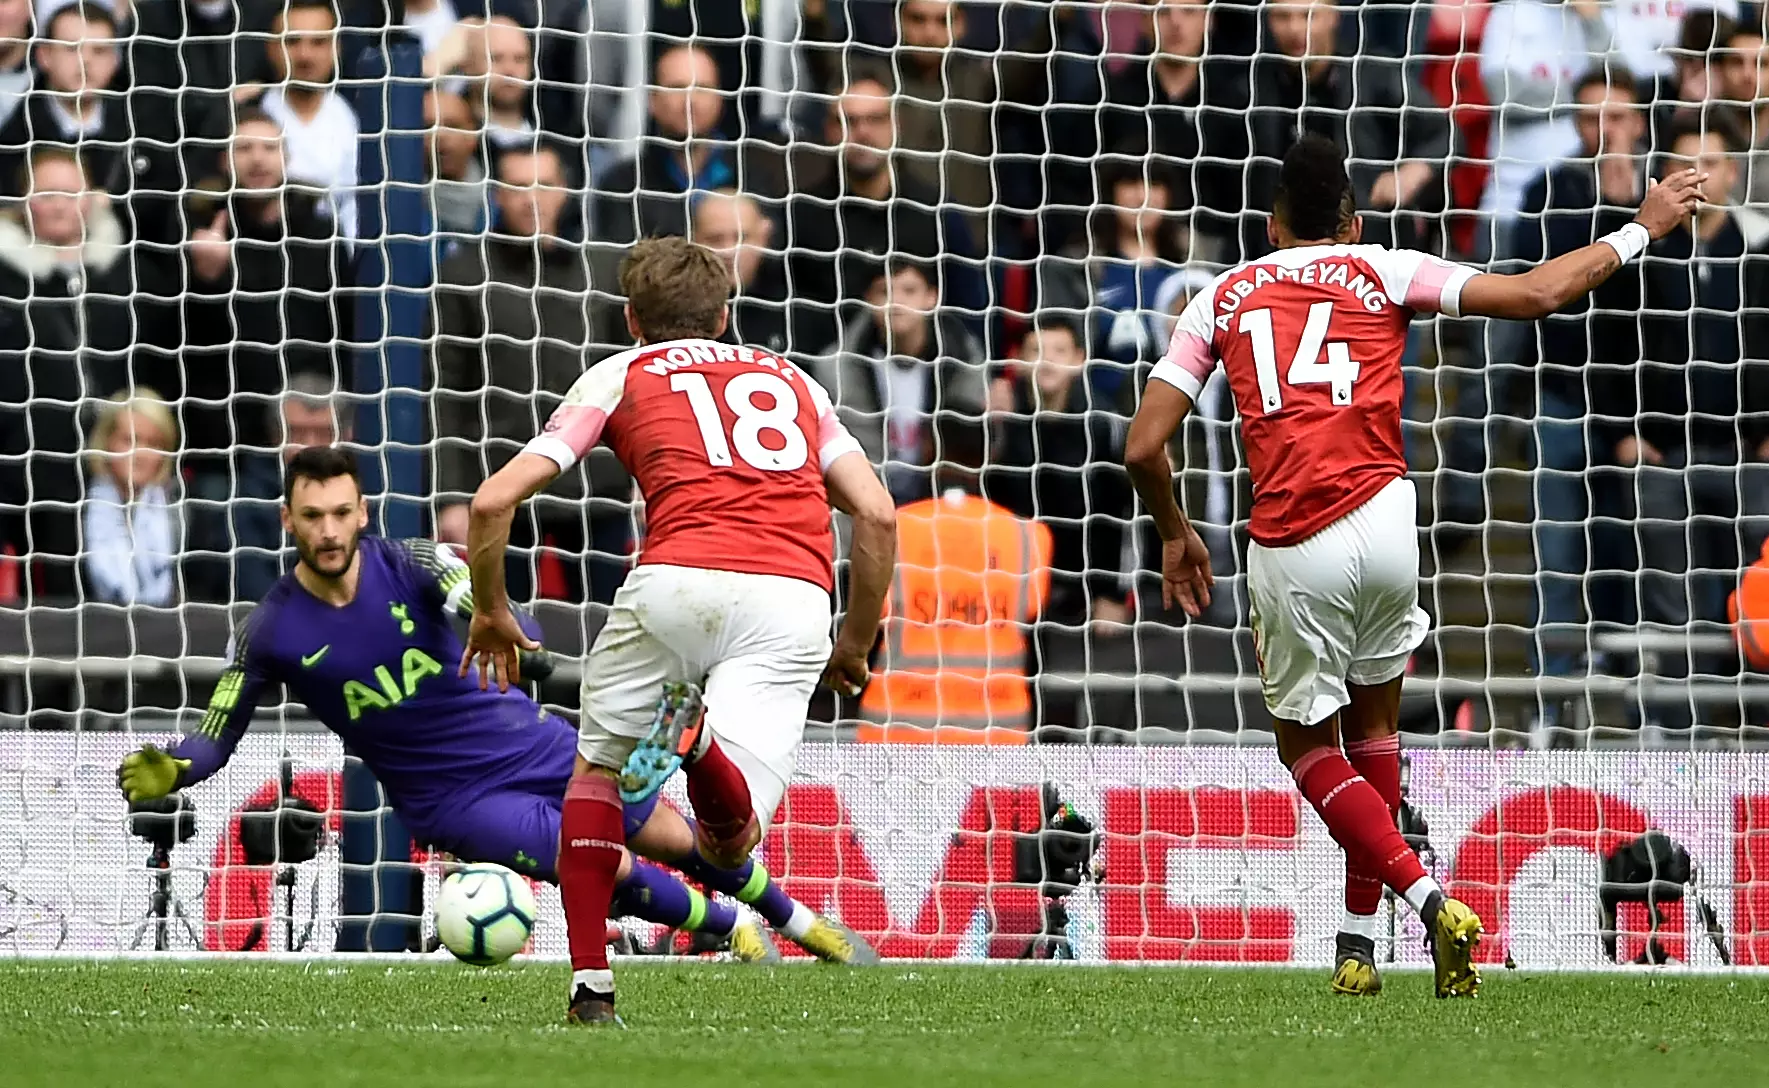 The last action of Spurs at Wembley could be Hugo Lloris' penalty save. Image: PA Images